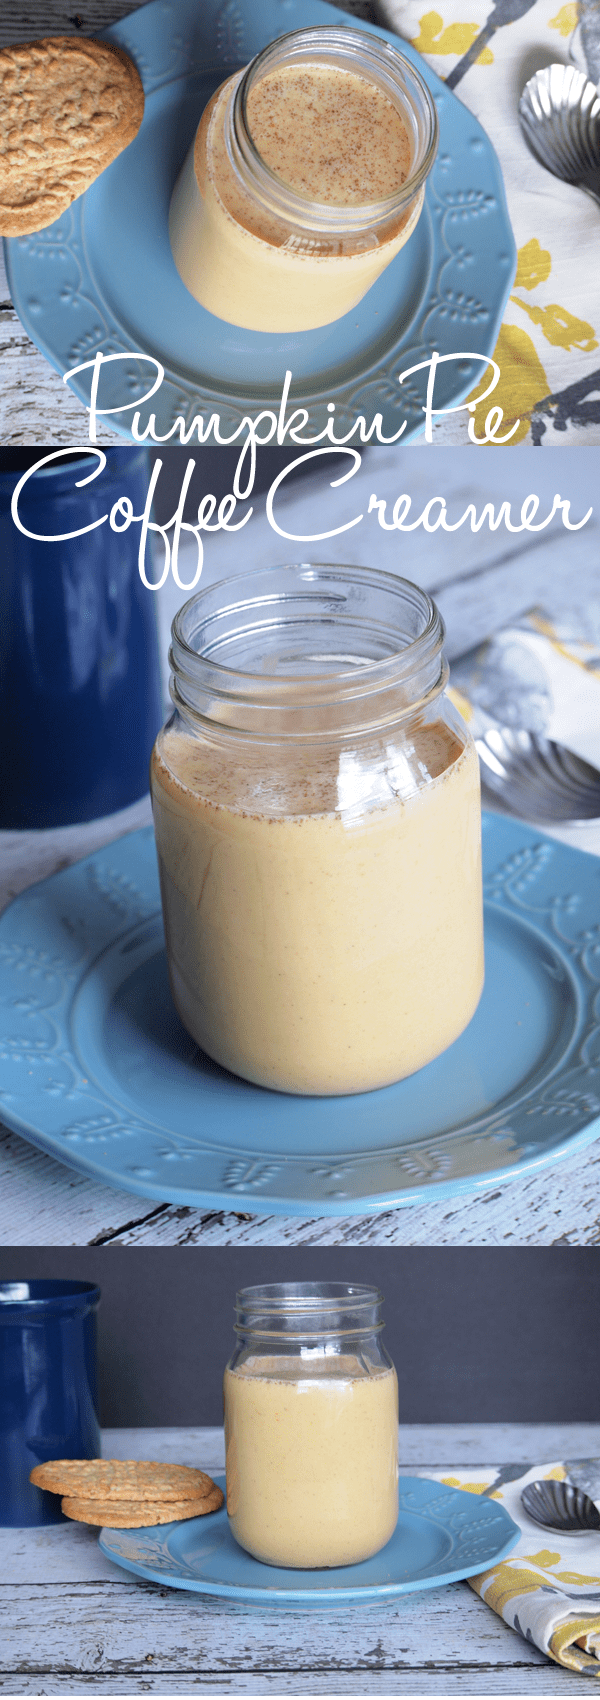 Pumpkin Pie Coffee Creamer! Click the picture to get the easy as pie recipe!